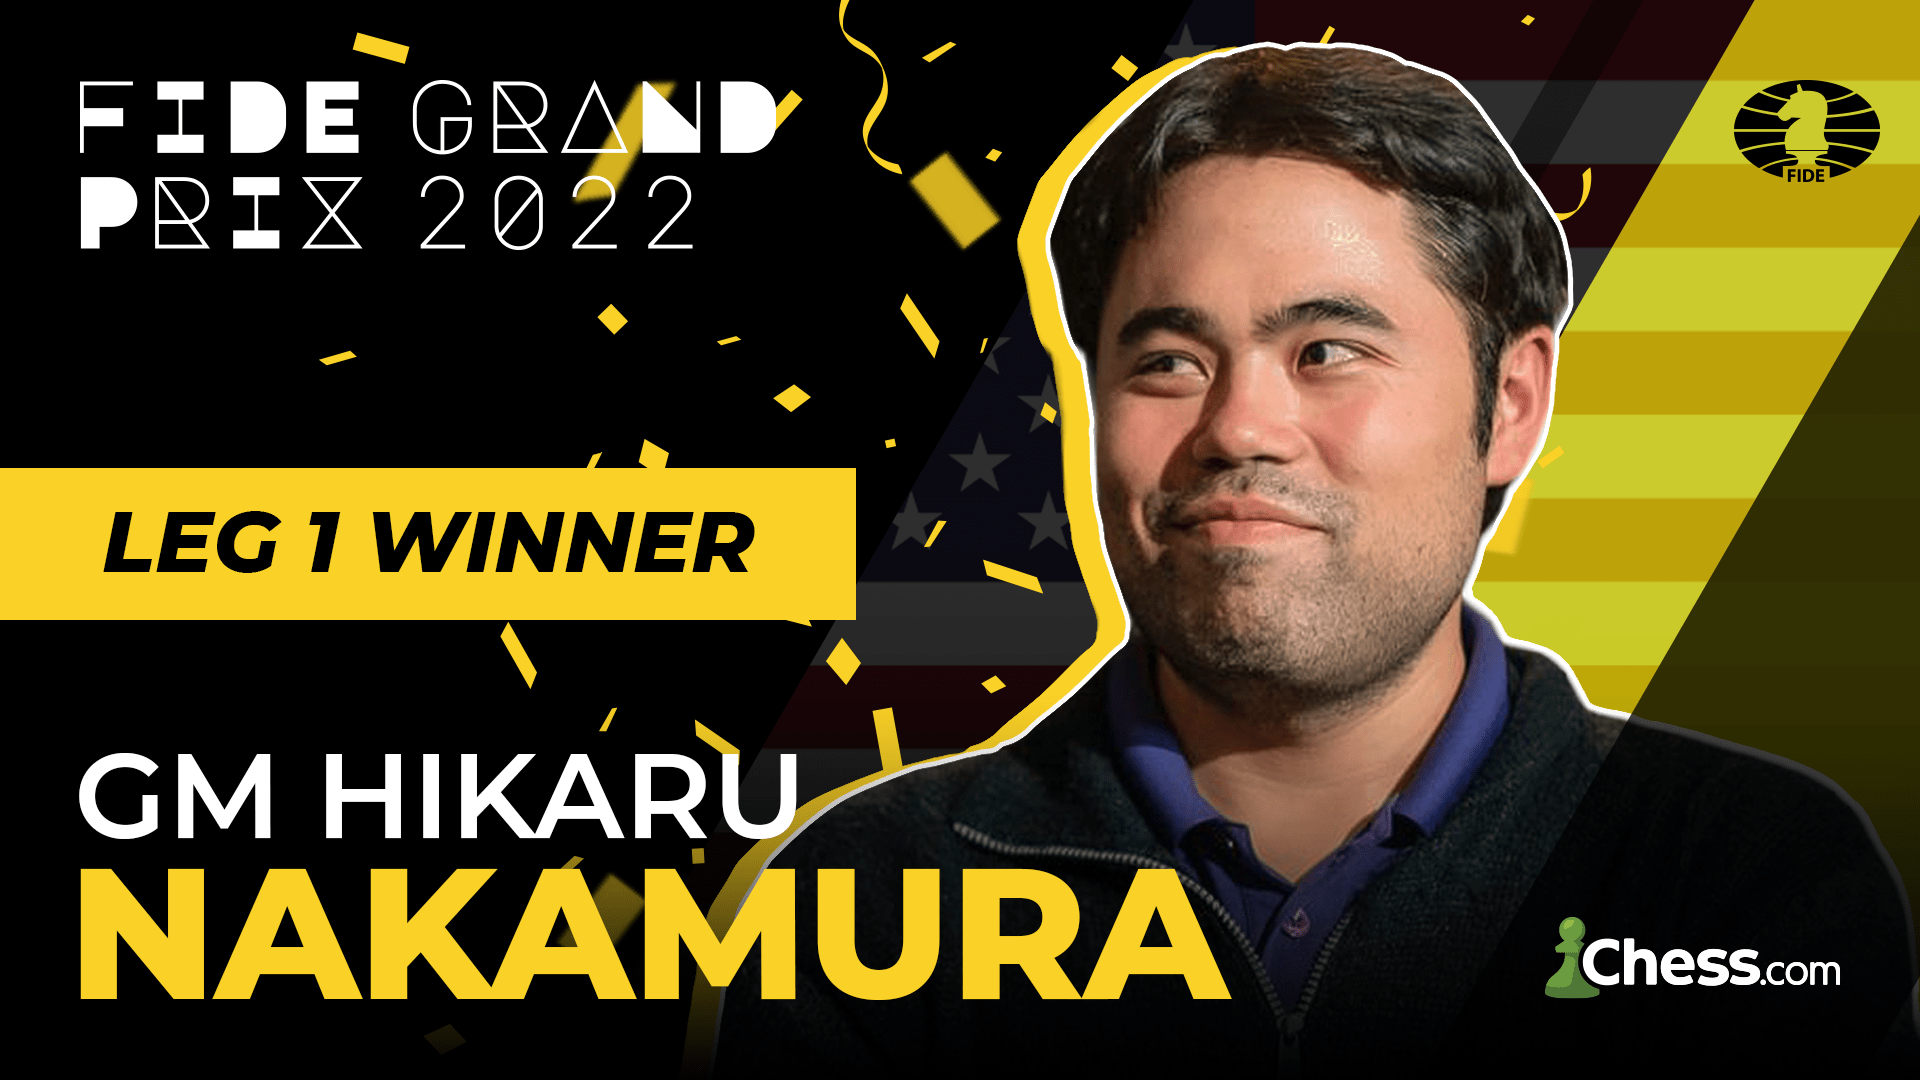 Nakamura and Rapport qualify for the Candidates